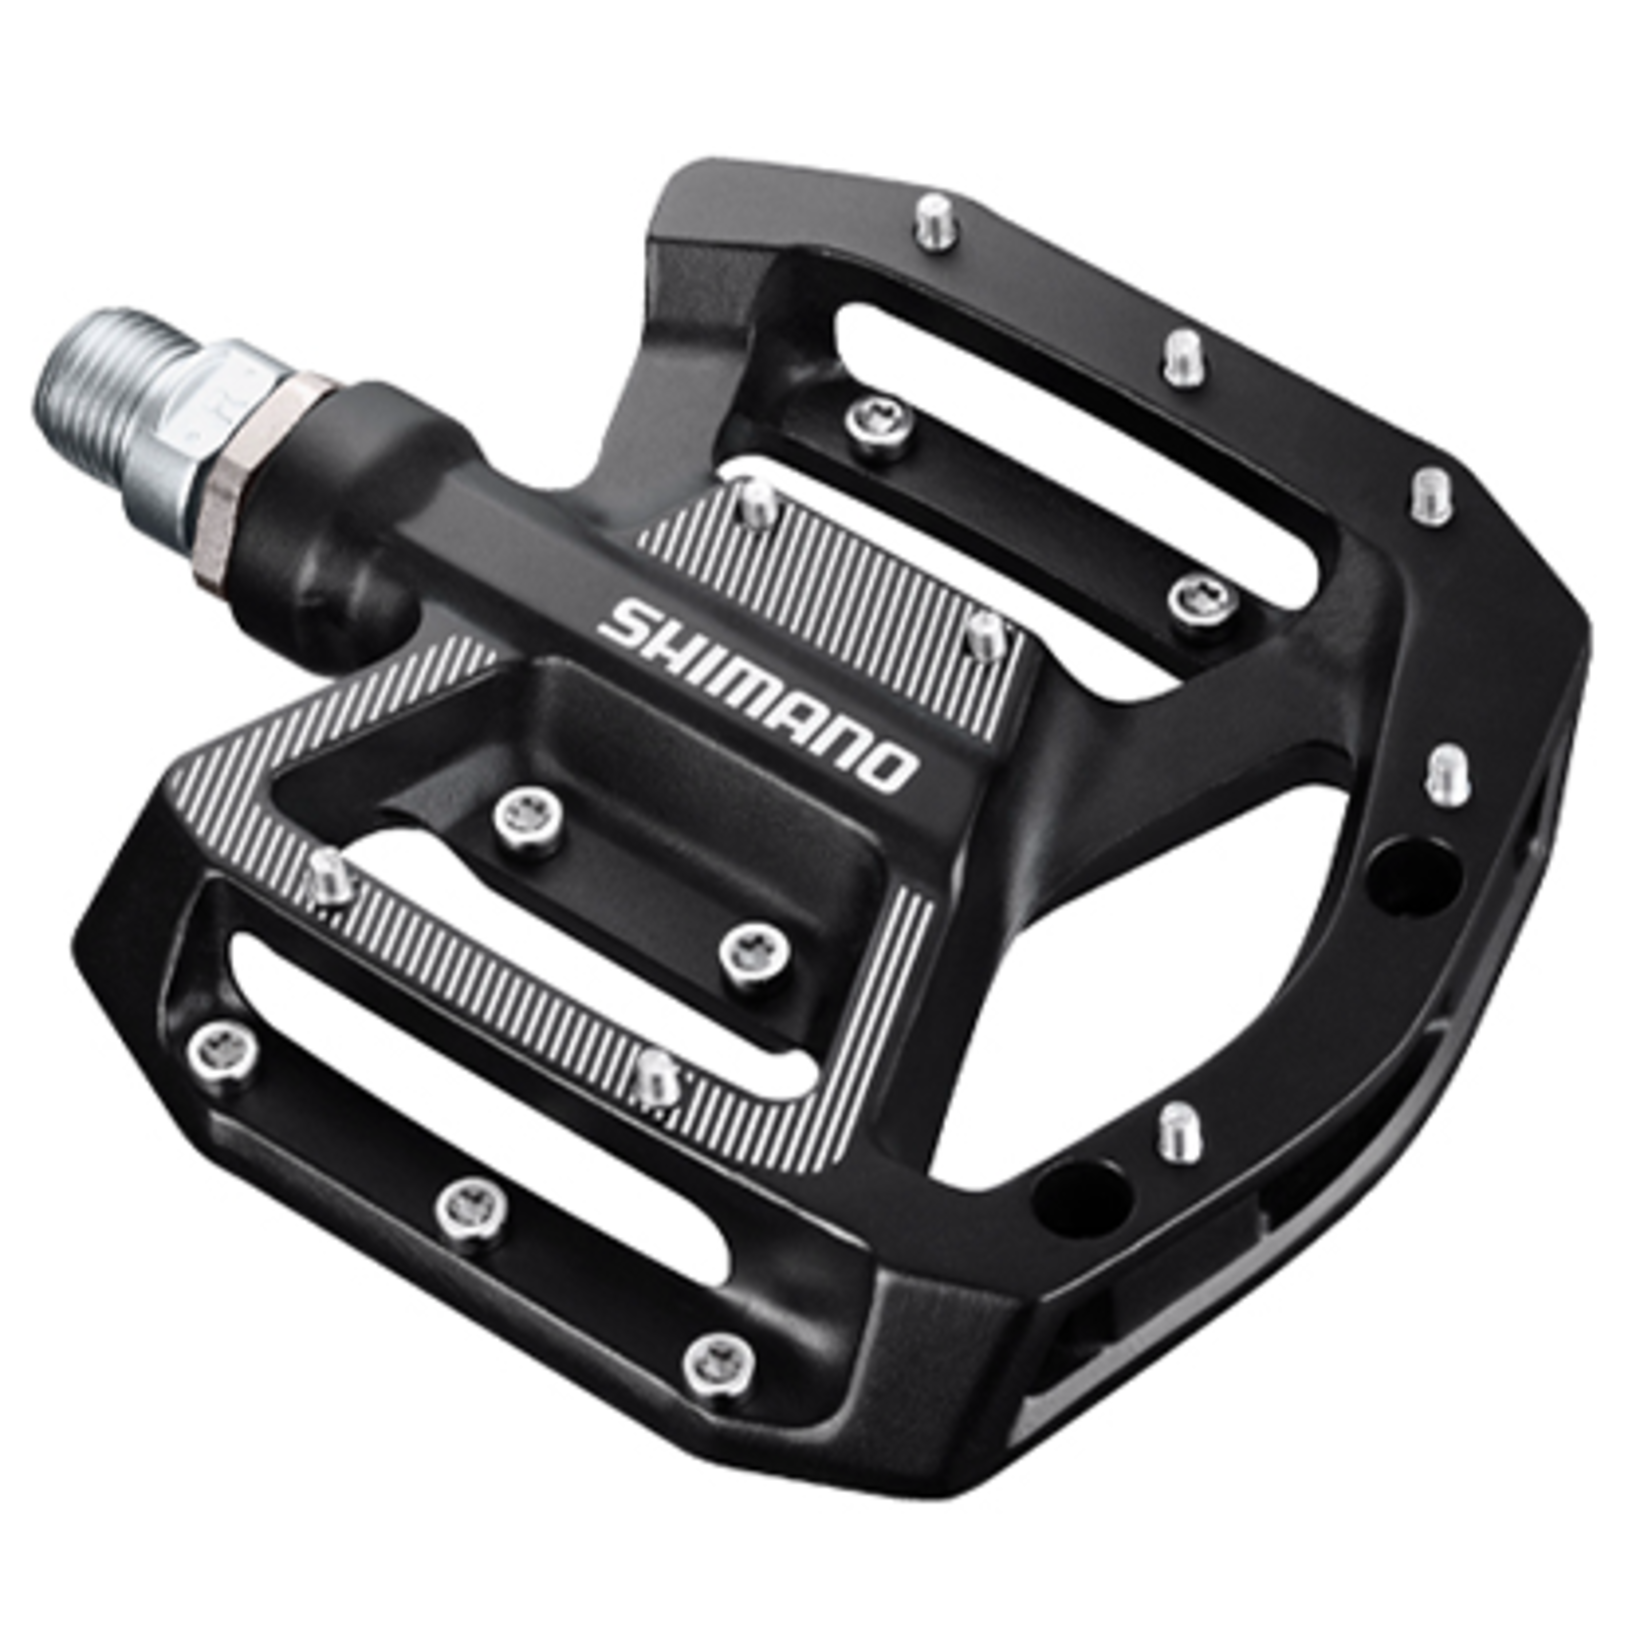 SHIMANO PEDALS  PD-GR500 FLAT PLATFORM BLACK TRAIL / ALL MOUNTAIN